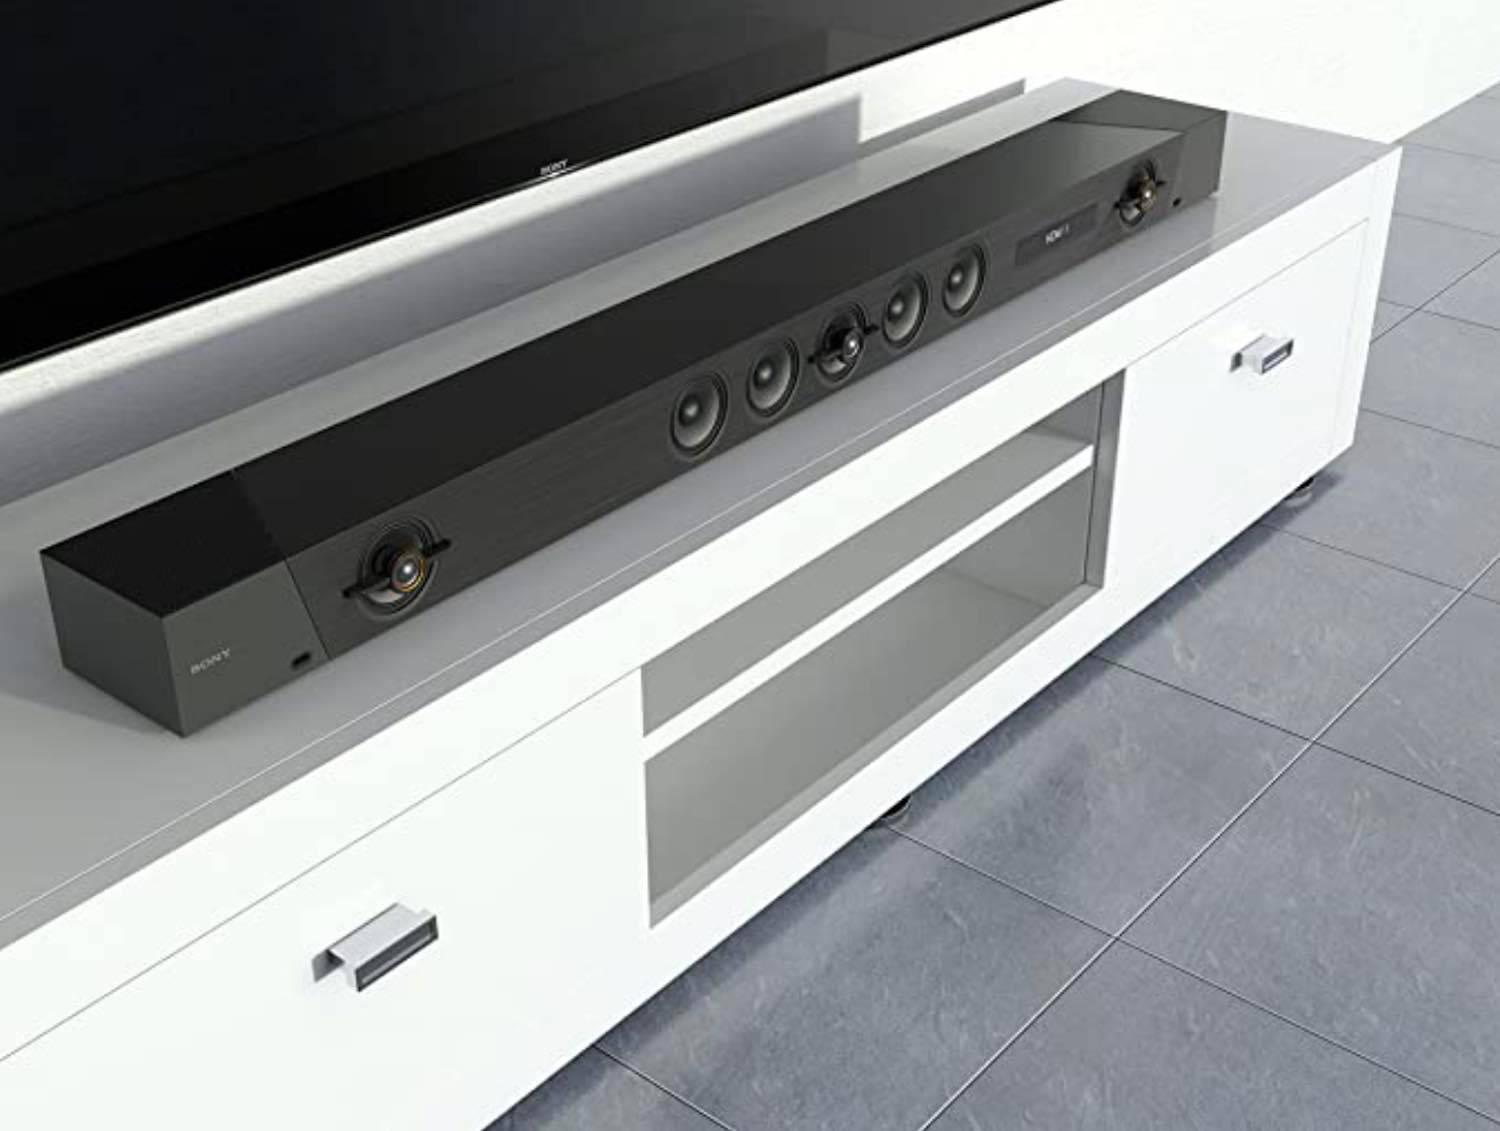 Sony sound bar bring the concert home